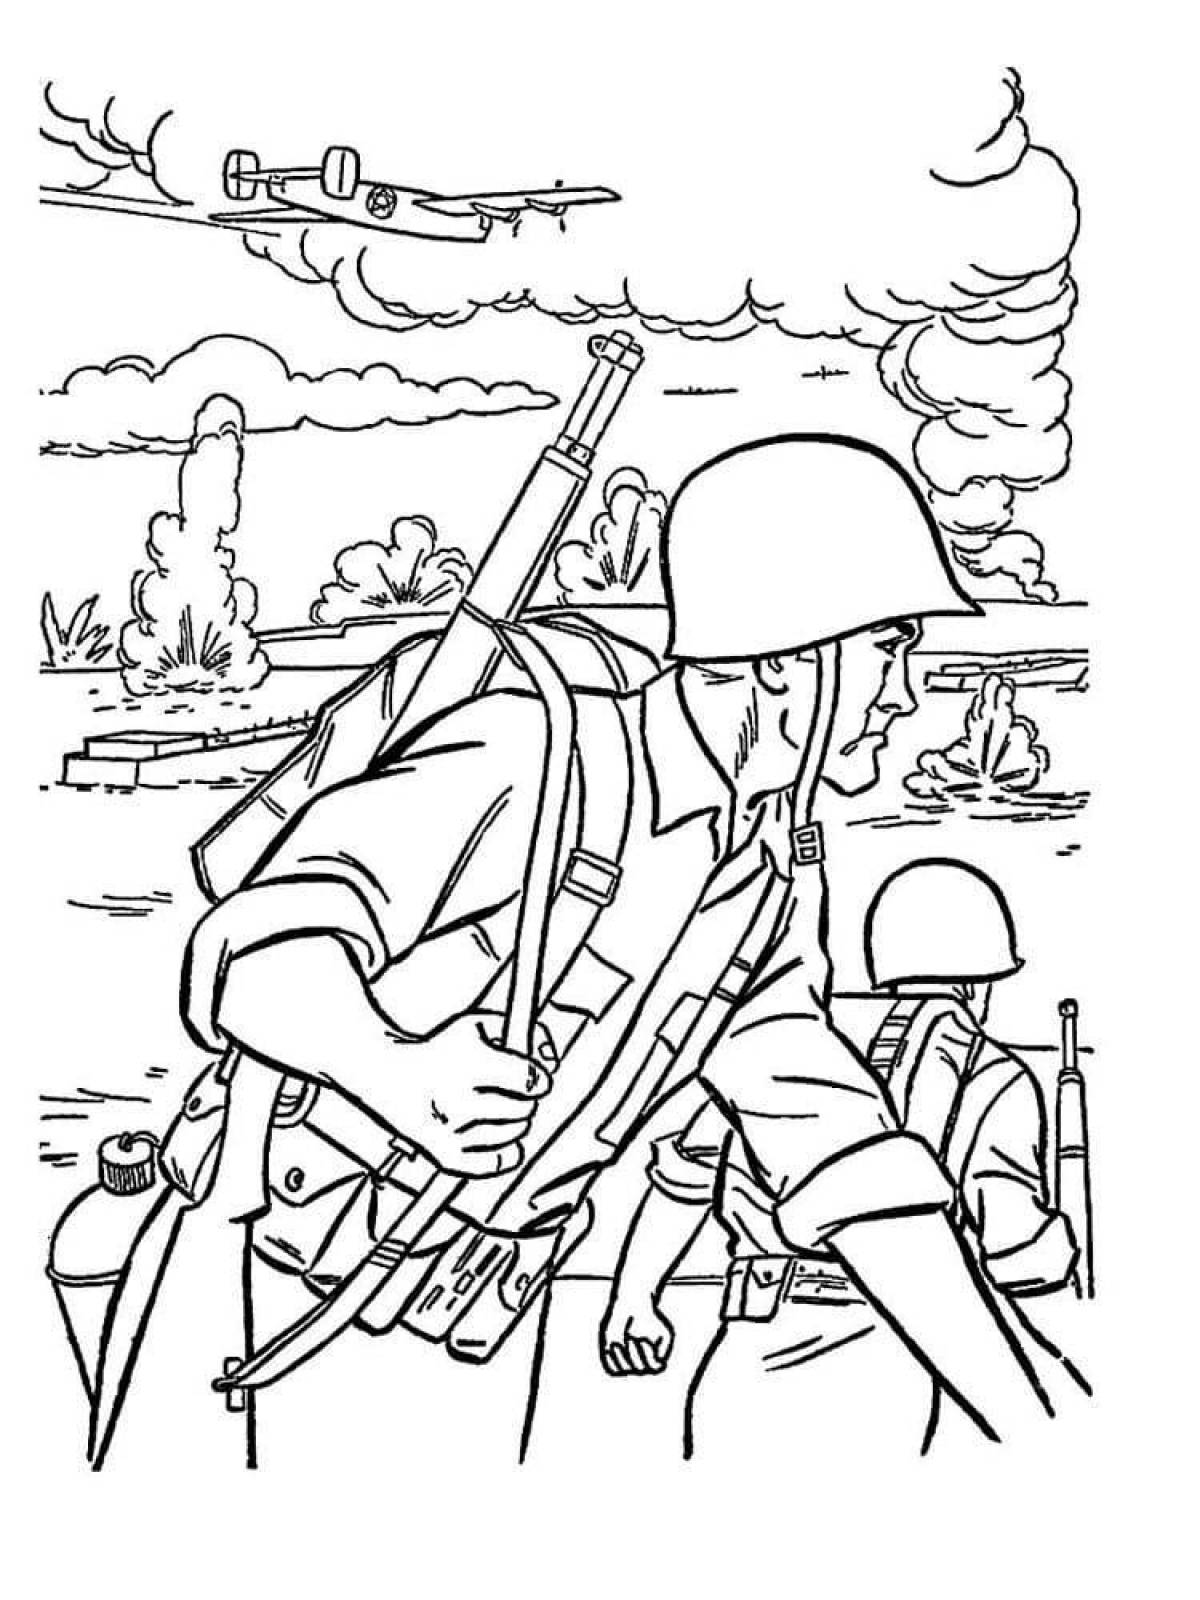 A fascinating coloring book about the second world war